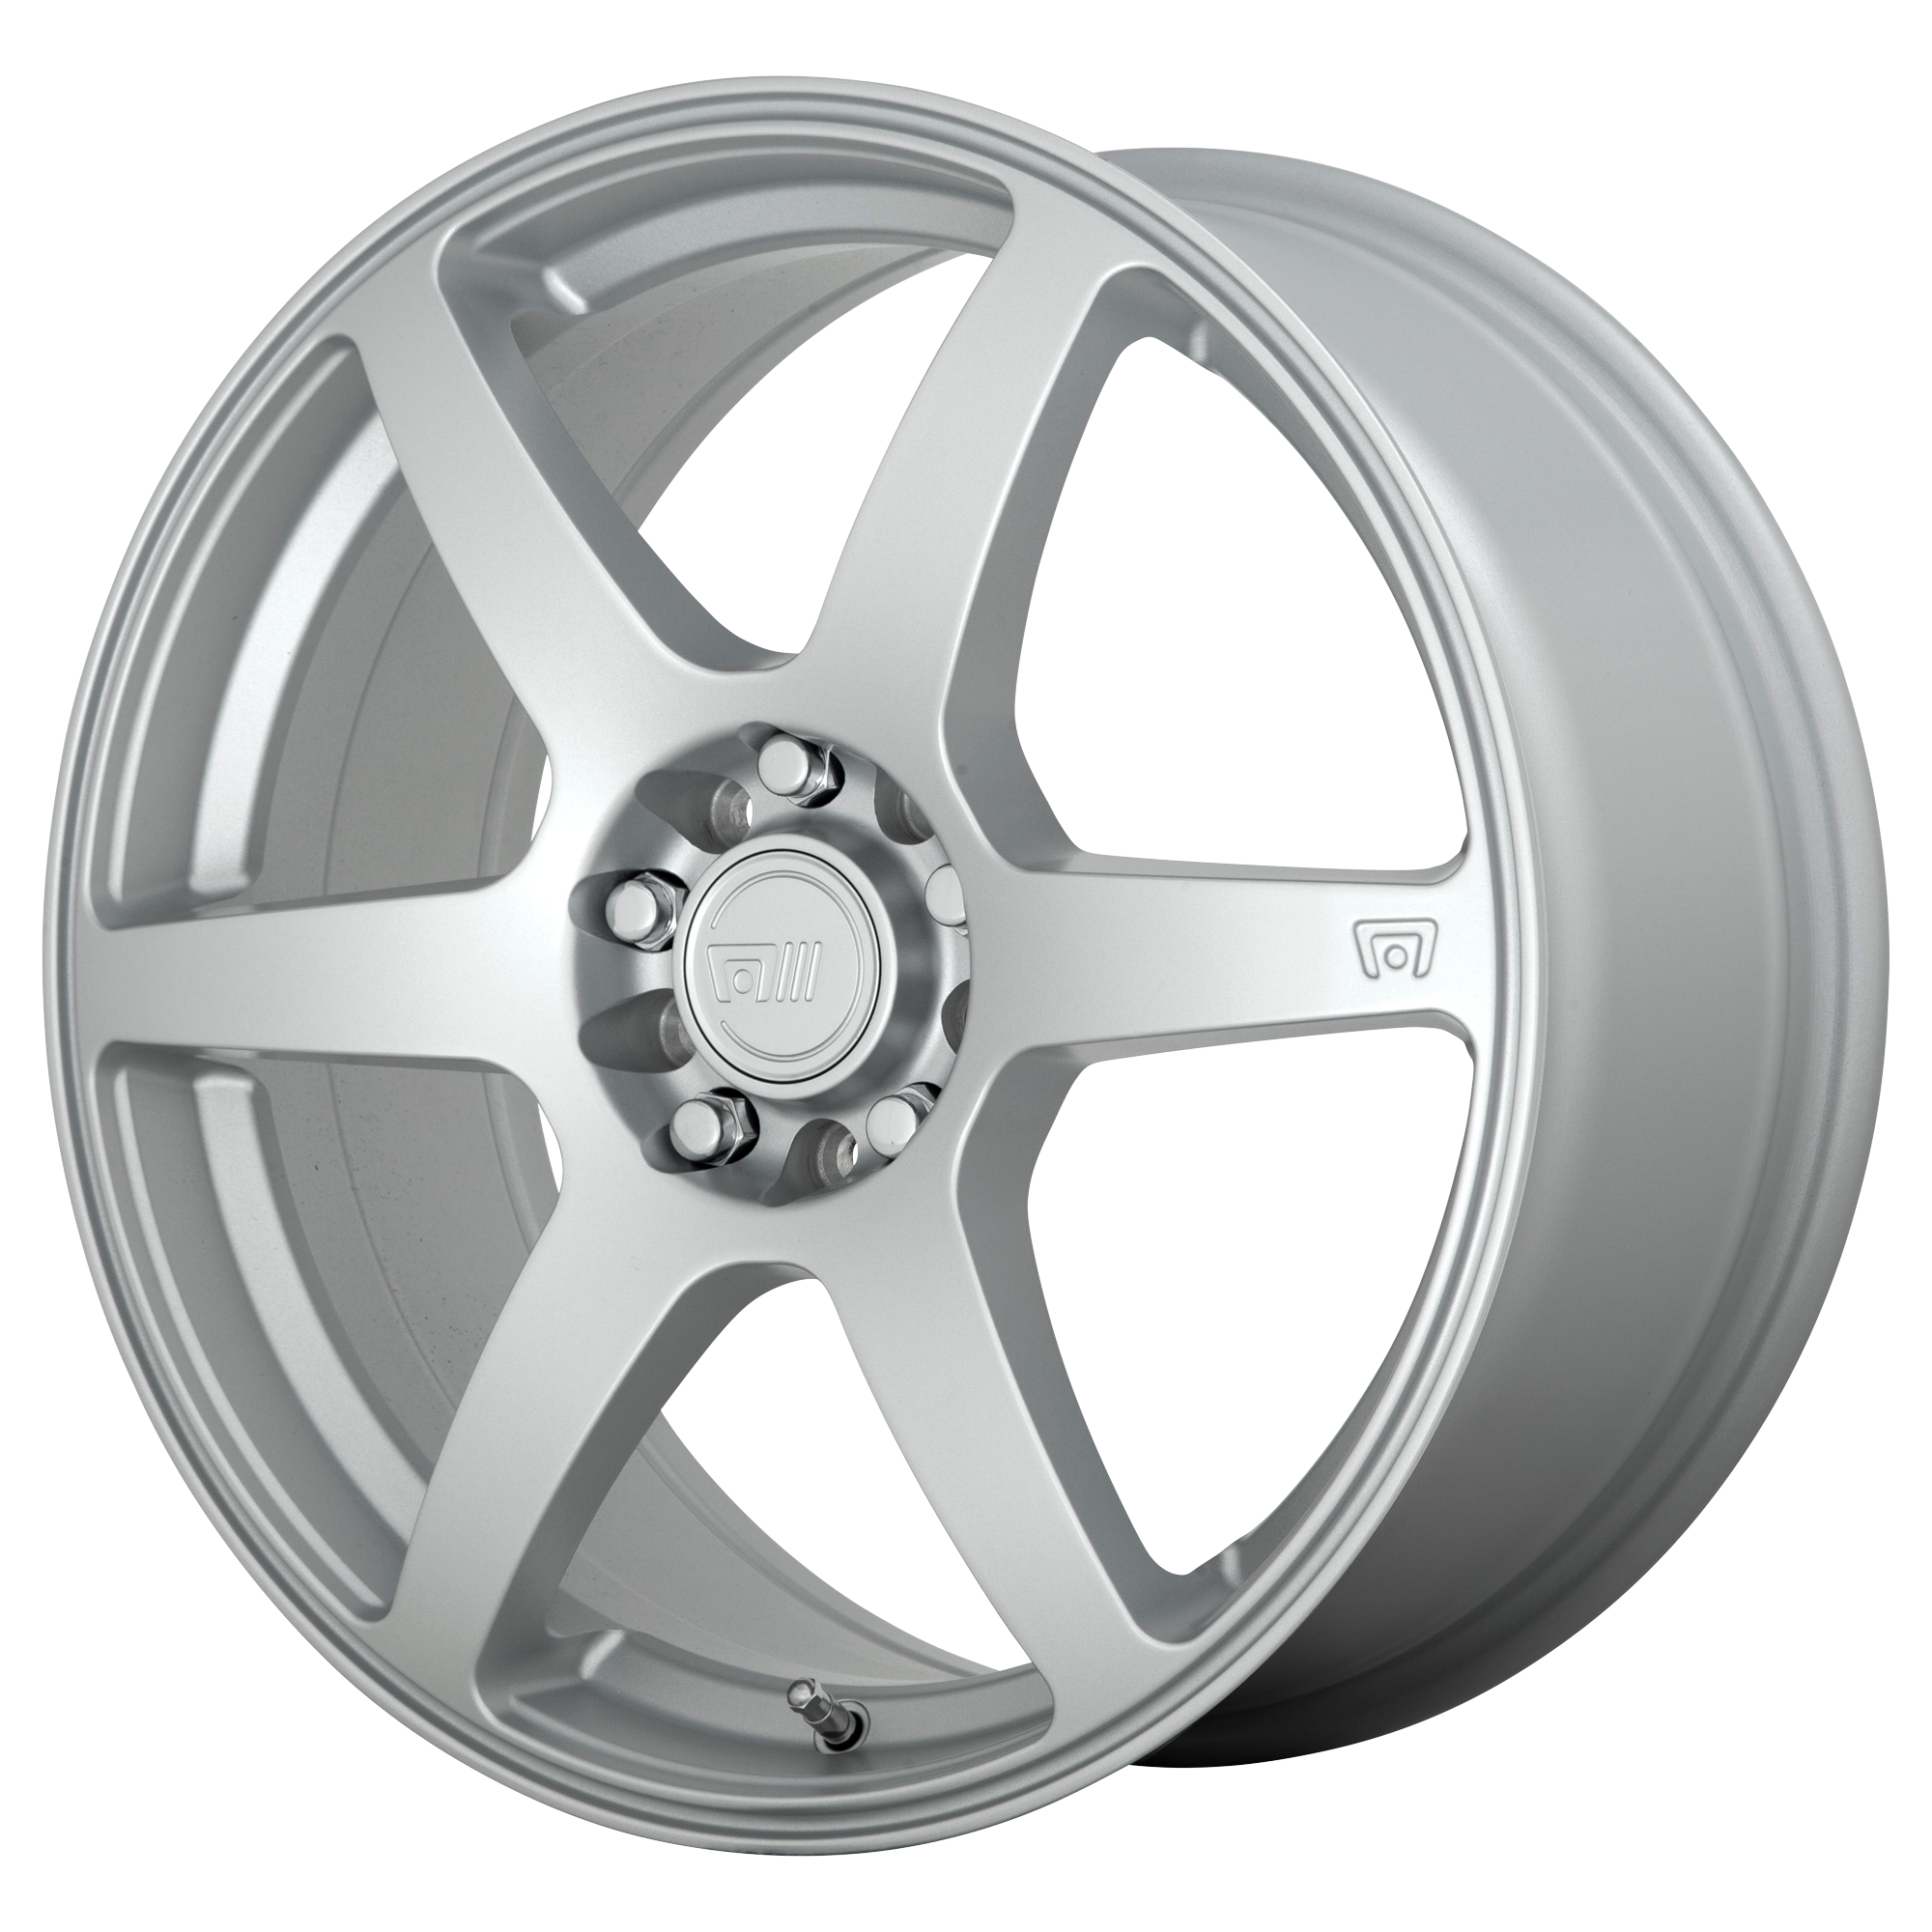 CS6 16x7 5x108.00/5x114.30 HYPER SILVER (40 mm) - Tires and Engine Performance